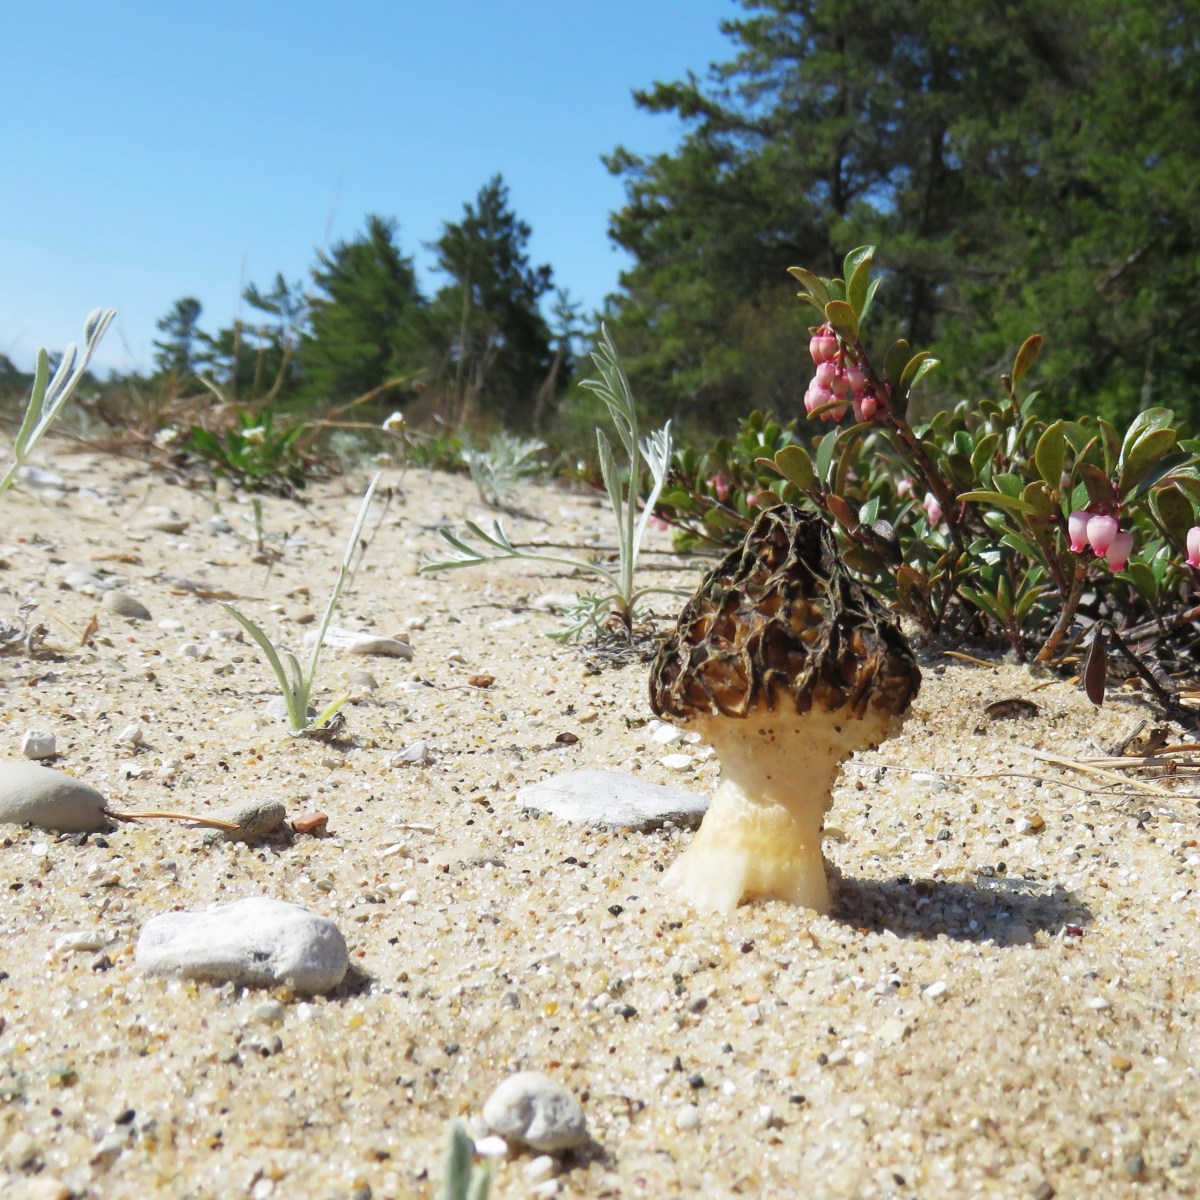 Morel mushroom growing on the beach at South Manitou Island